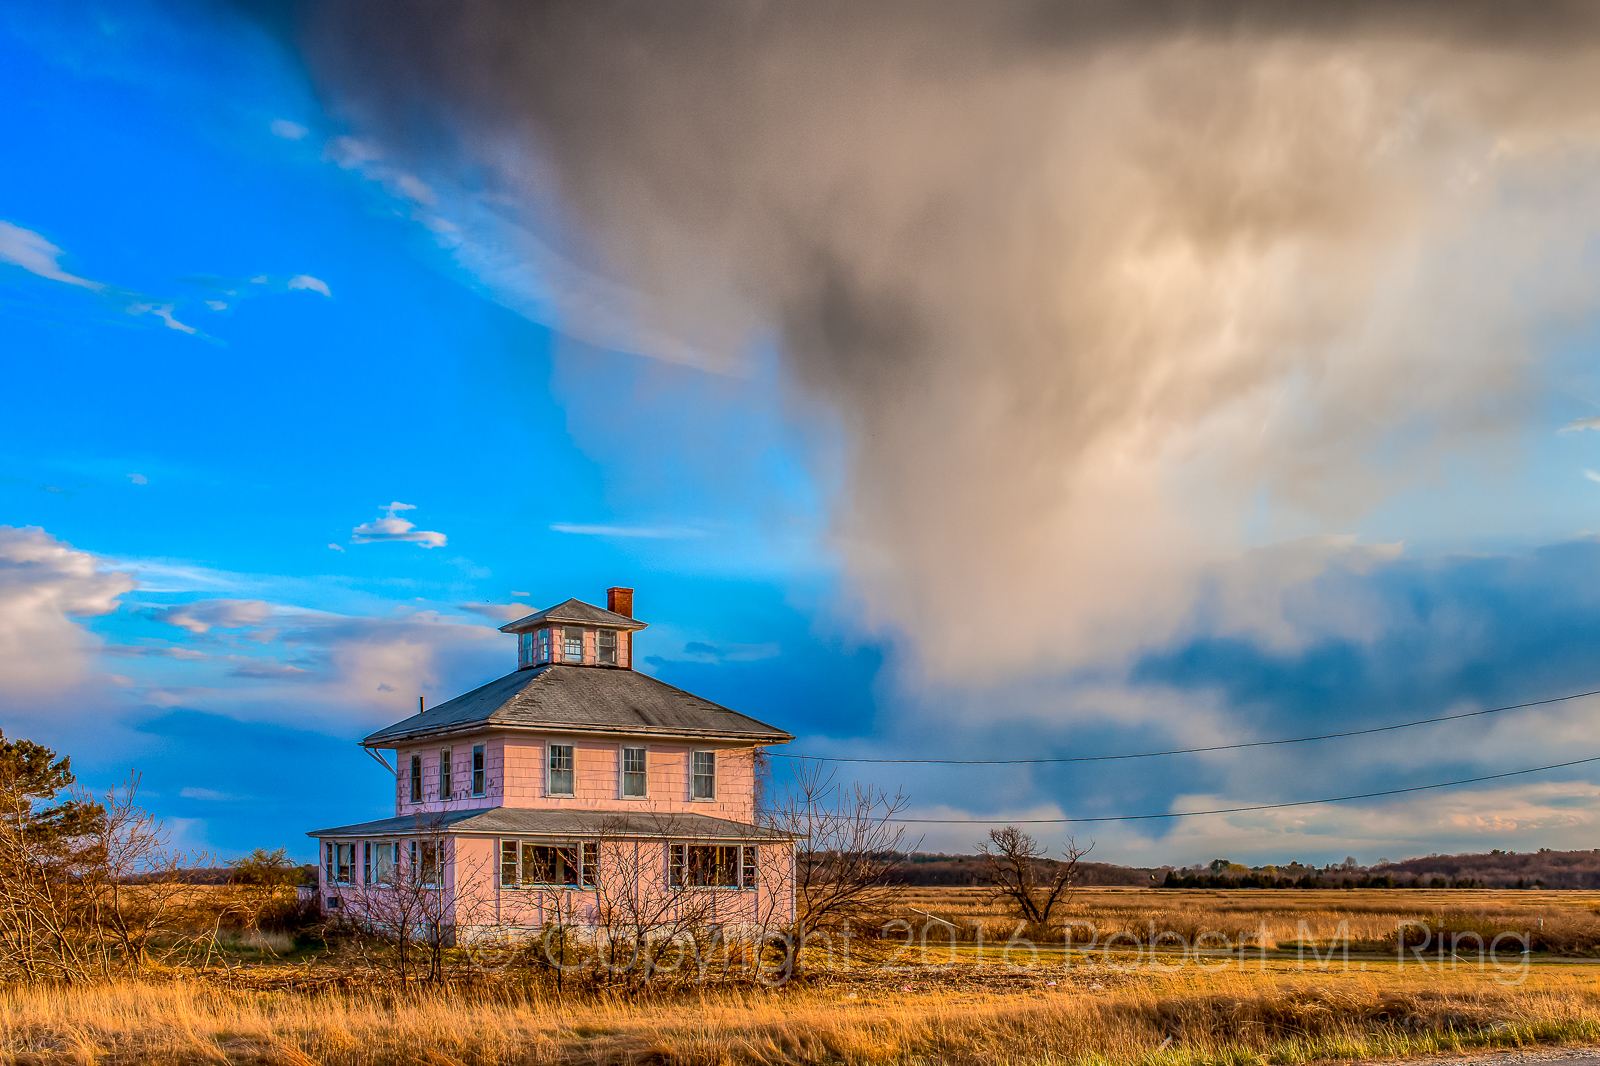 In April of 2012 I was heading home after photographing some storm clouds by the ocean. &nbsp;As I was driving by the pink house...